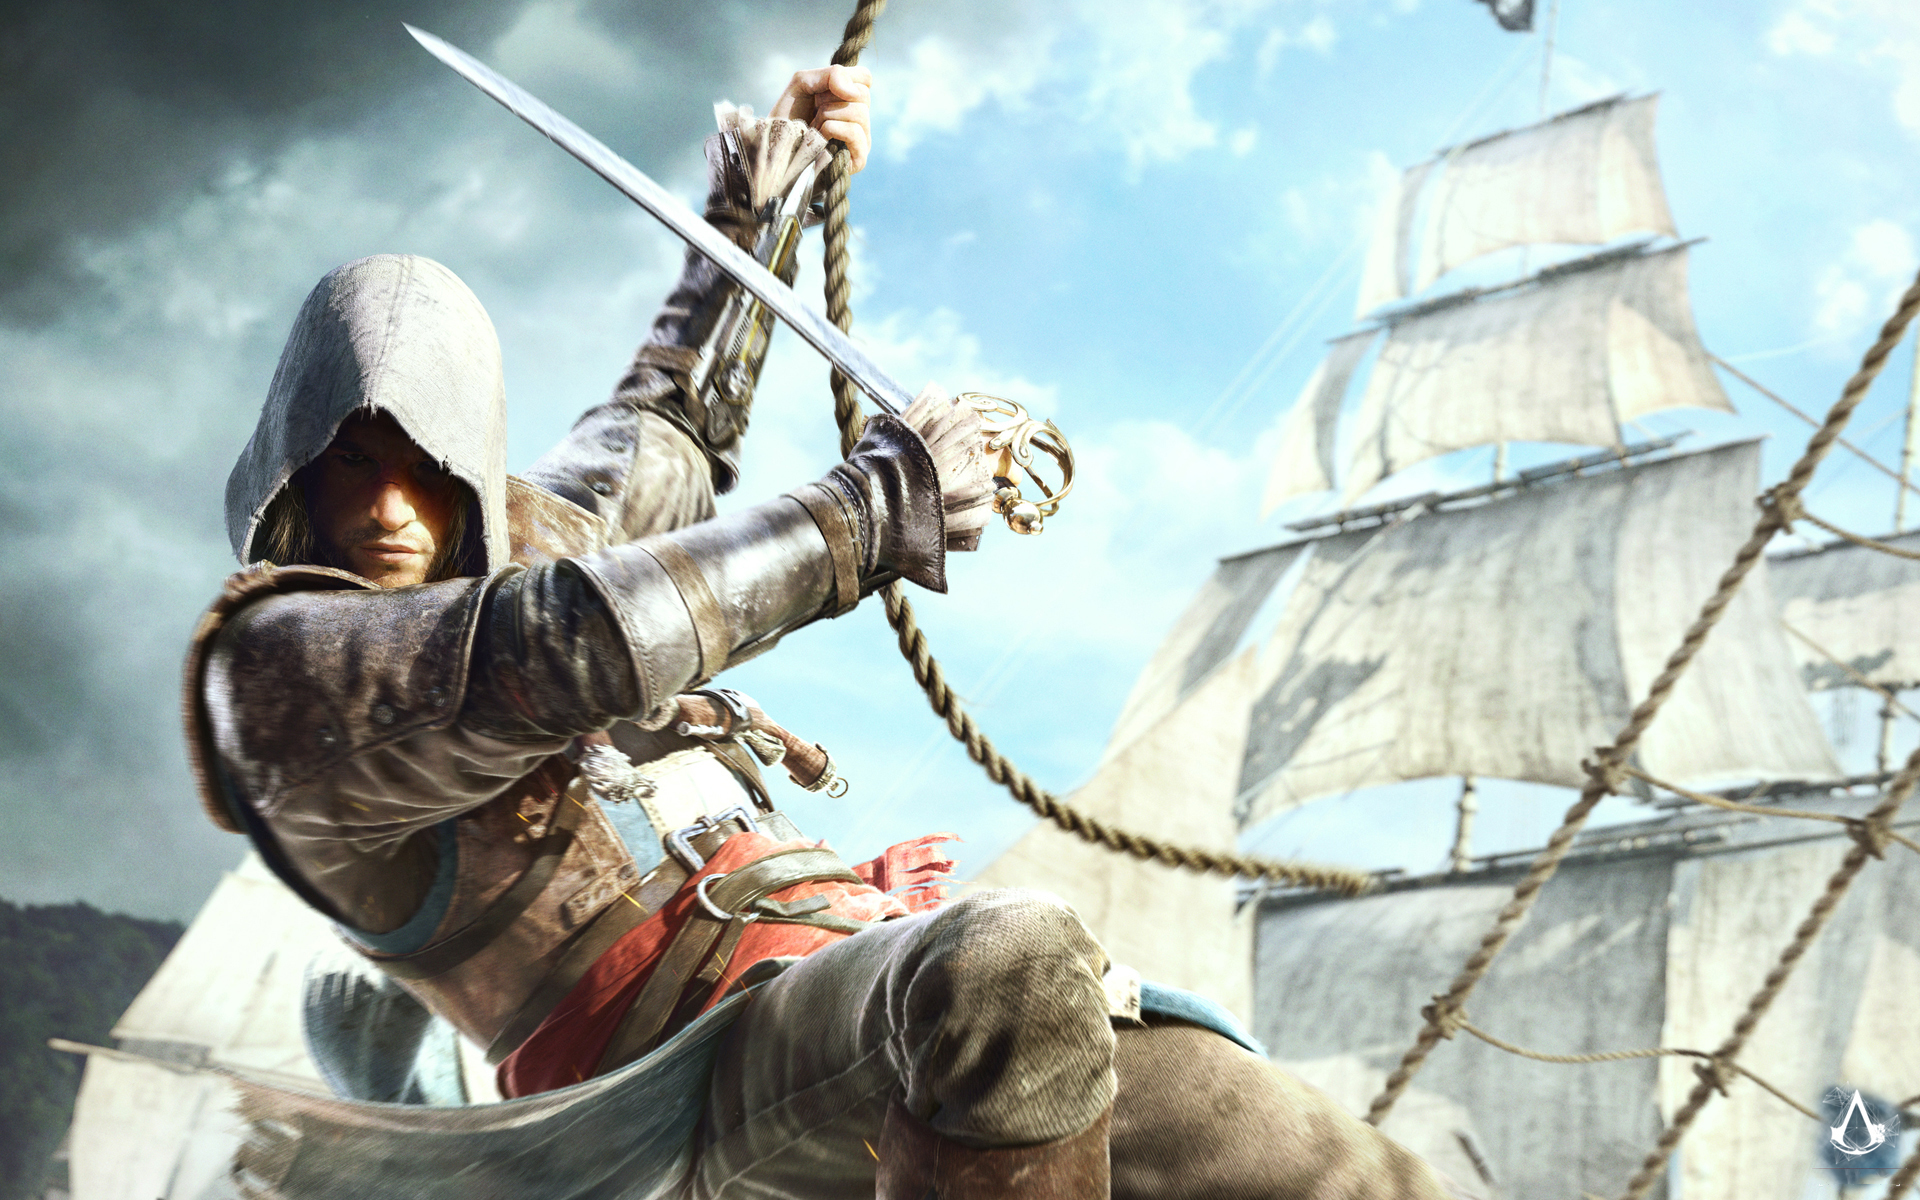 assassin's creed 3d wallpaper,action adventure game,games,strategy video game,adventure game,pc game